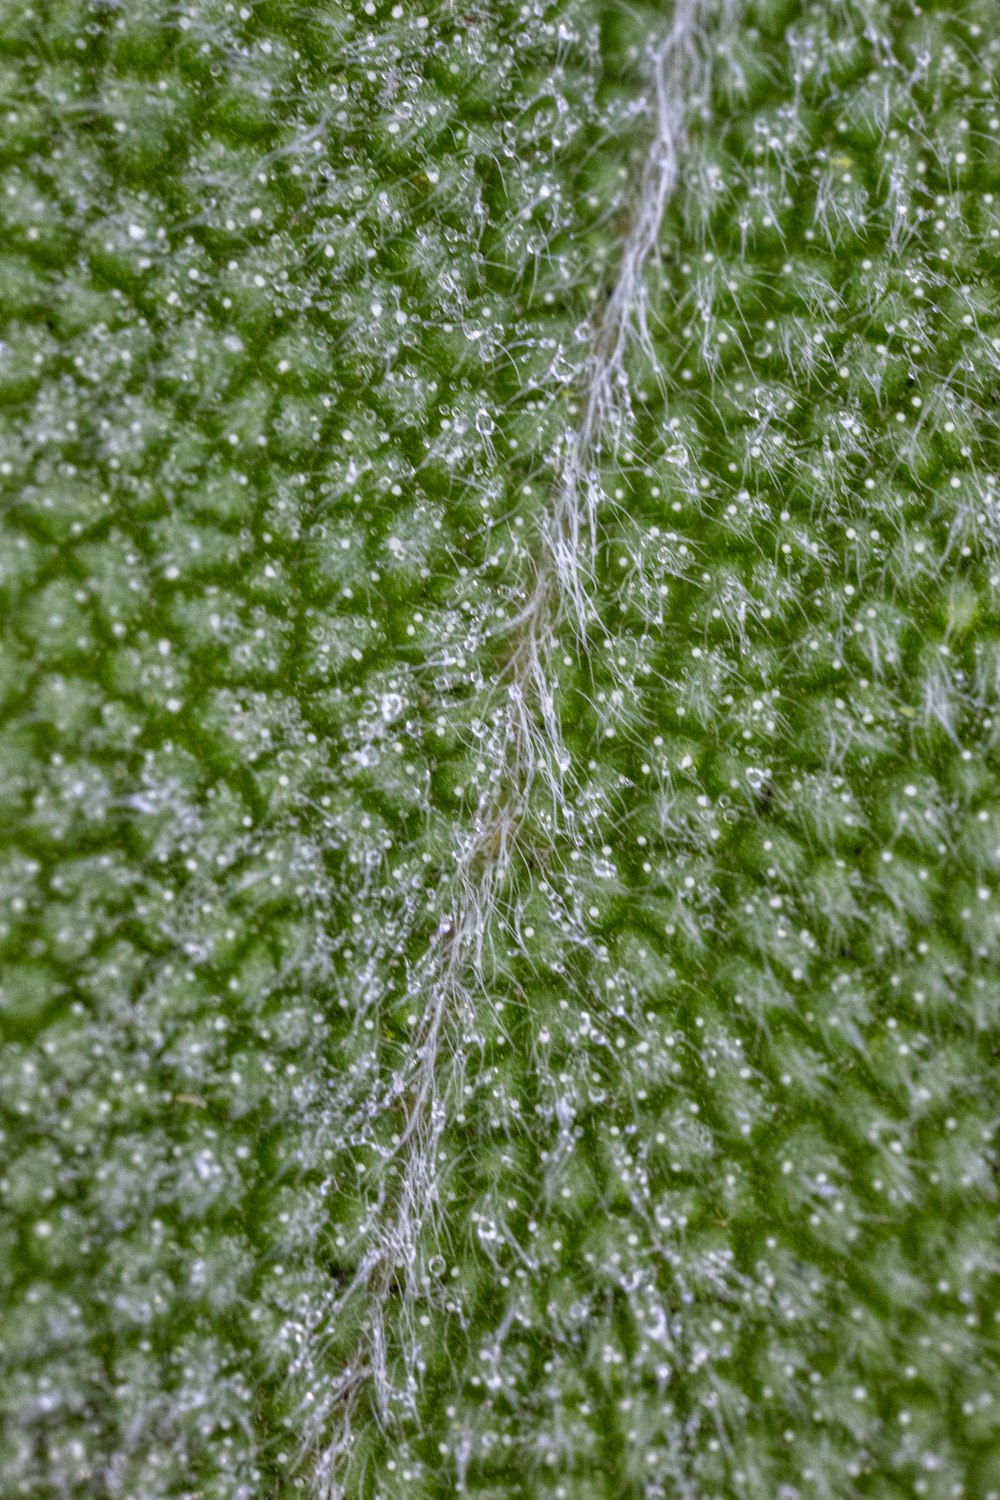 a close up of a green leaf with water droplets on it